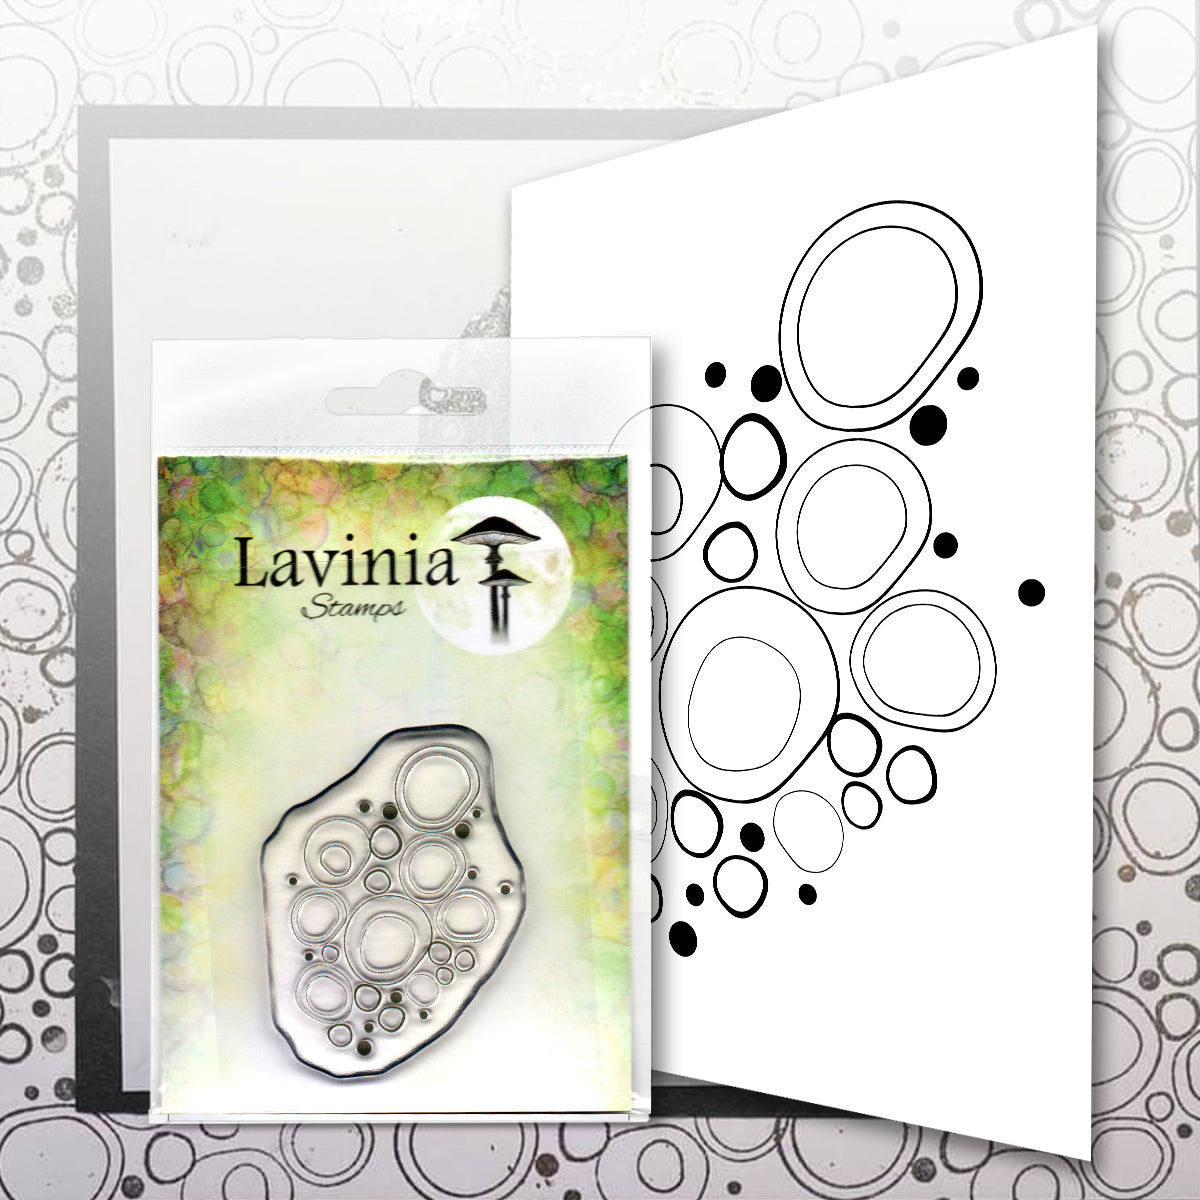 Lavinia Stamps -Blue Orbs Arts & Crafts Lavivia Stamps